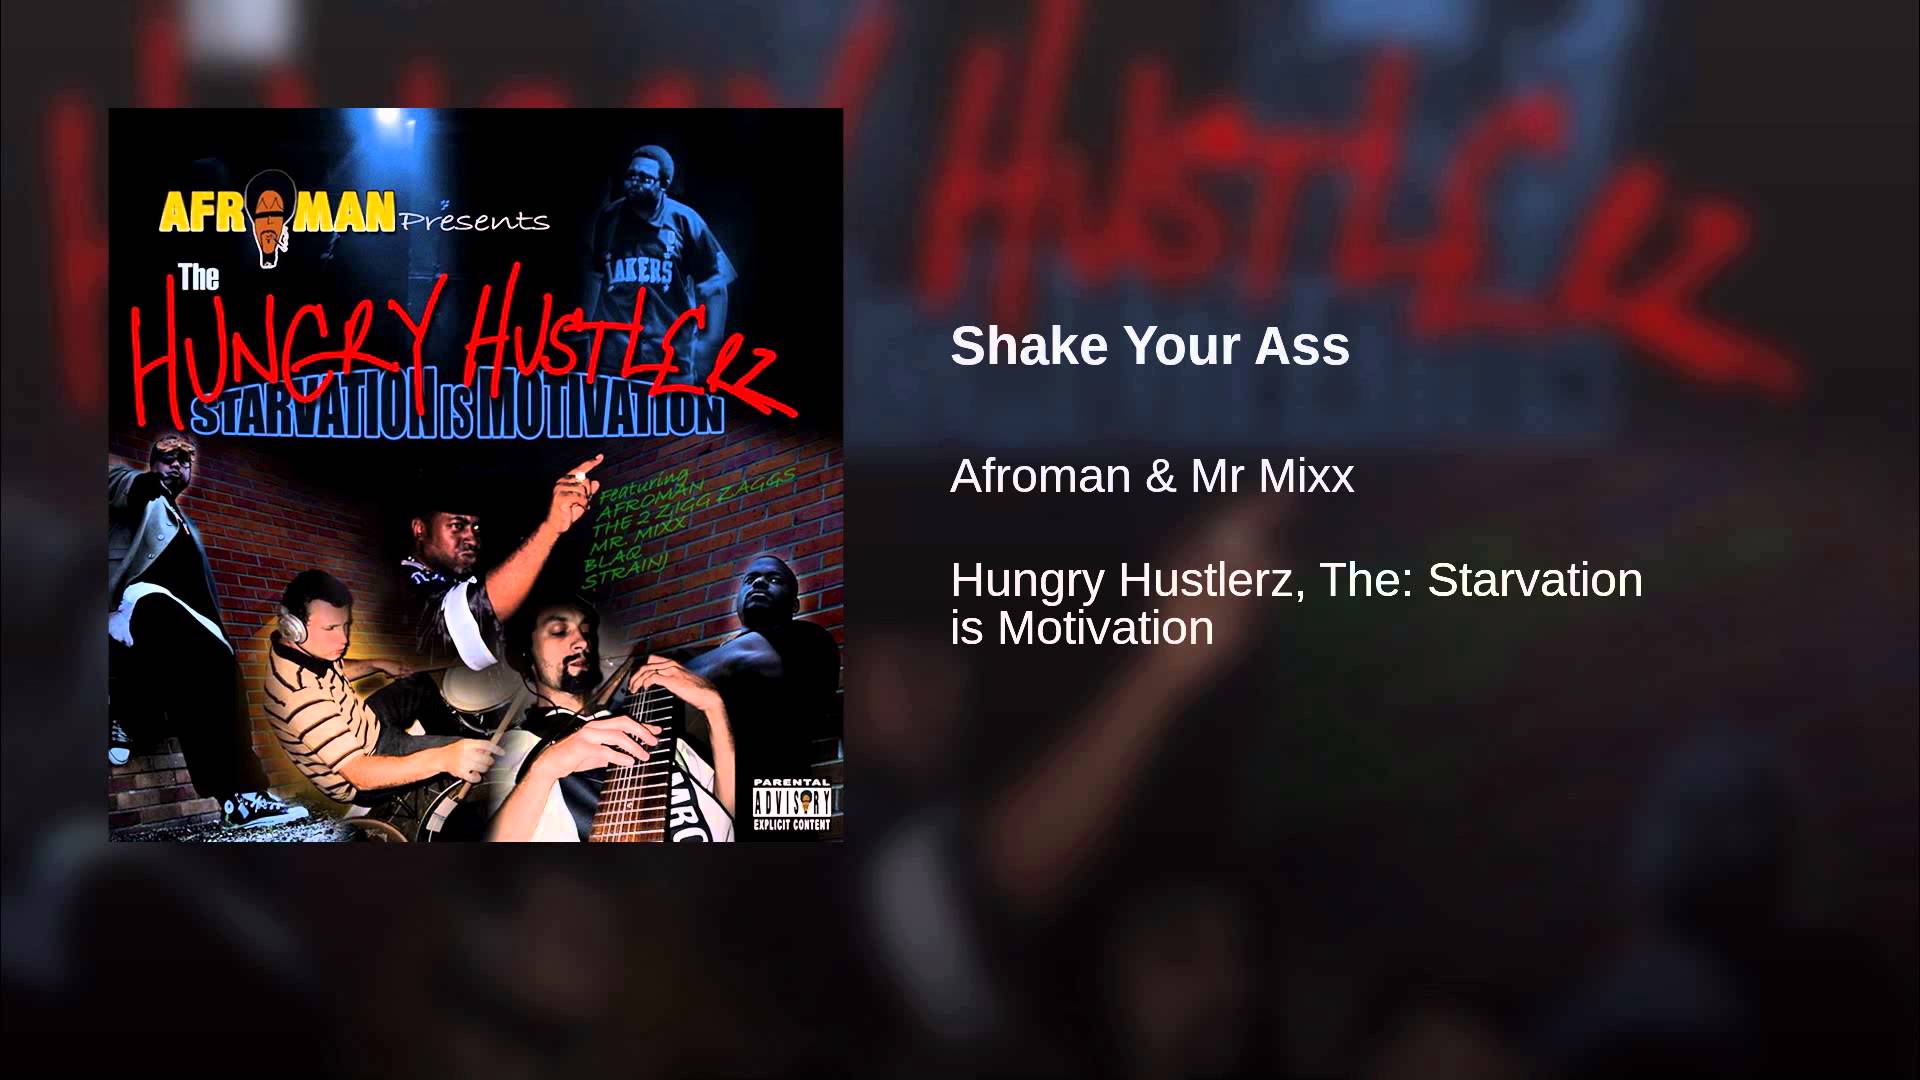 Shake Your Ass - YouTube